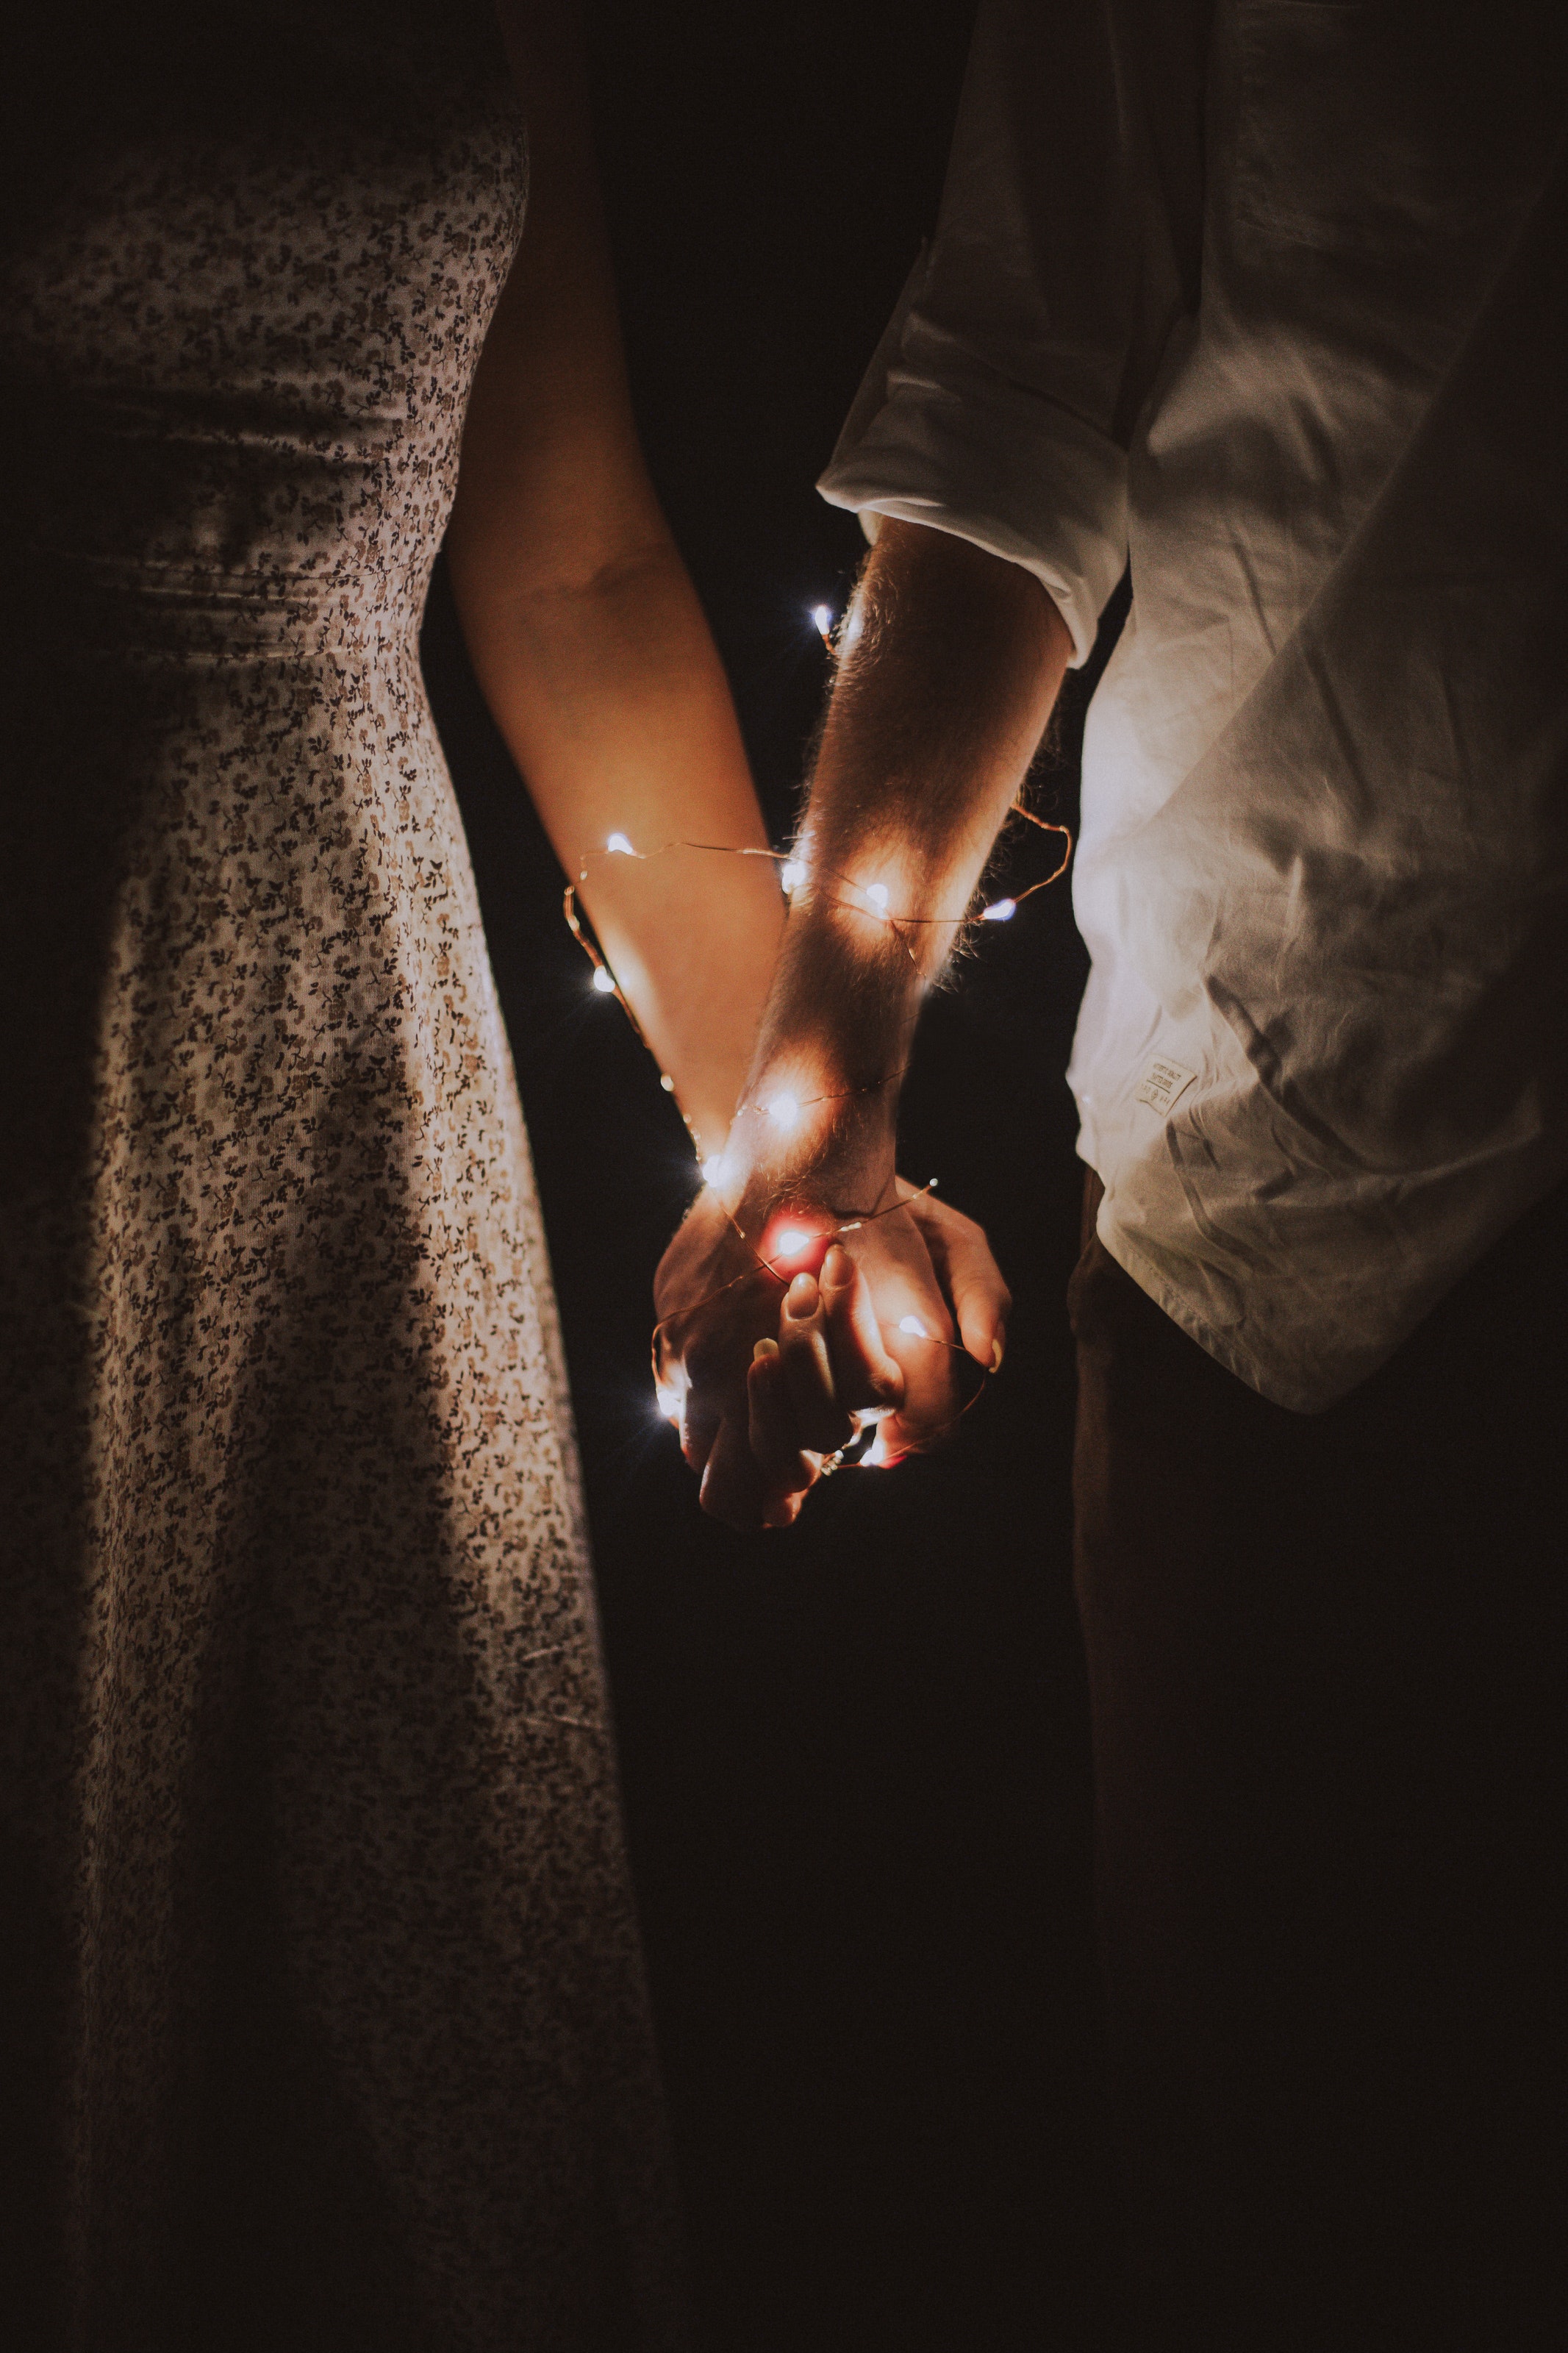 Man and woman holding each others hand wrapped with string lights. | Source: Pexels